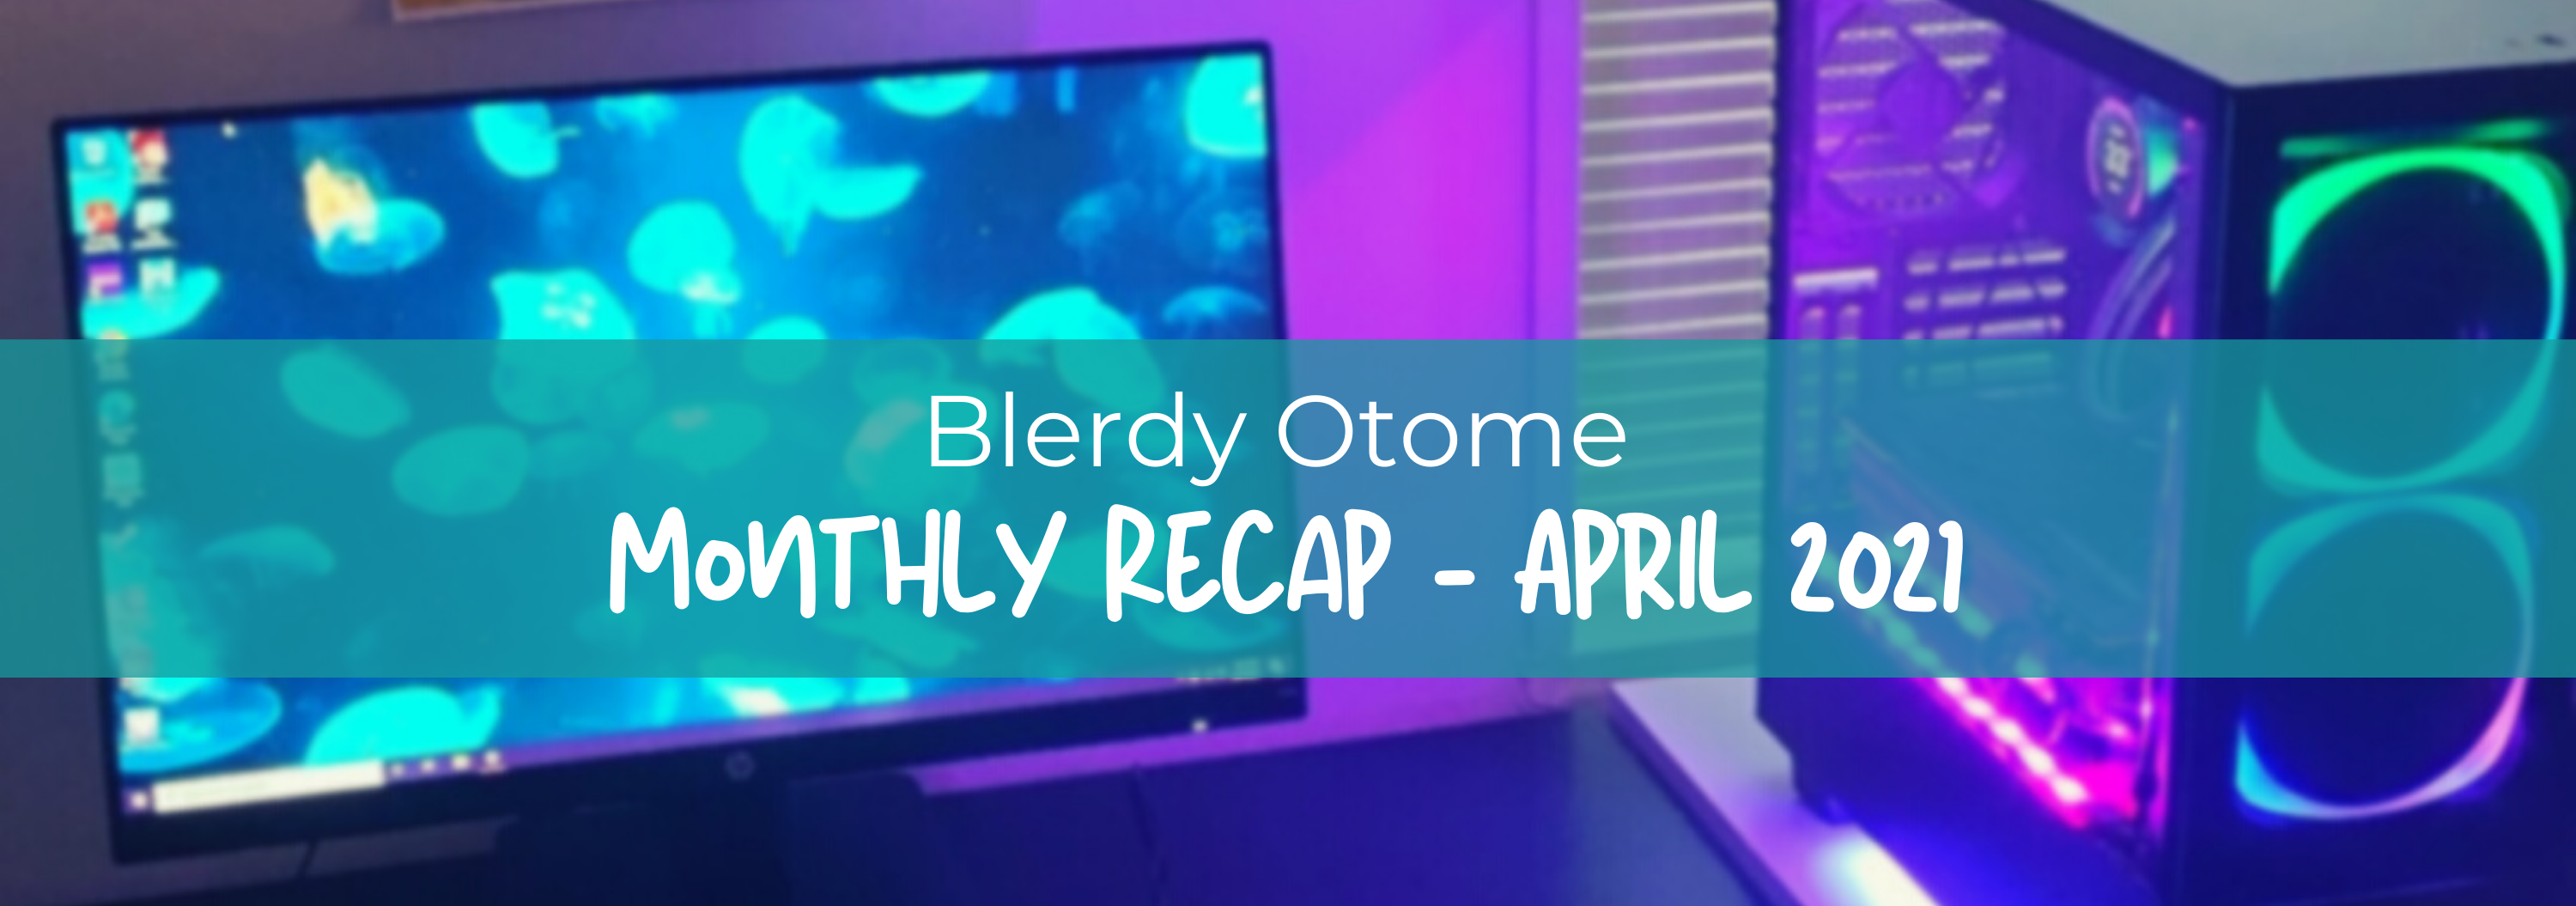 Blerdy Otome Monthly Recap – April 2021